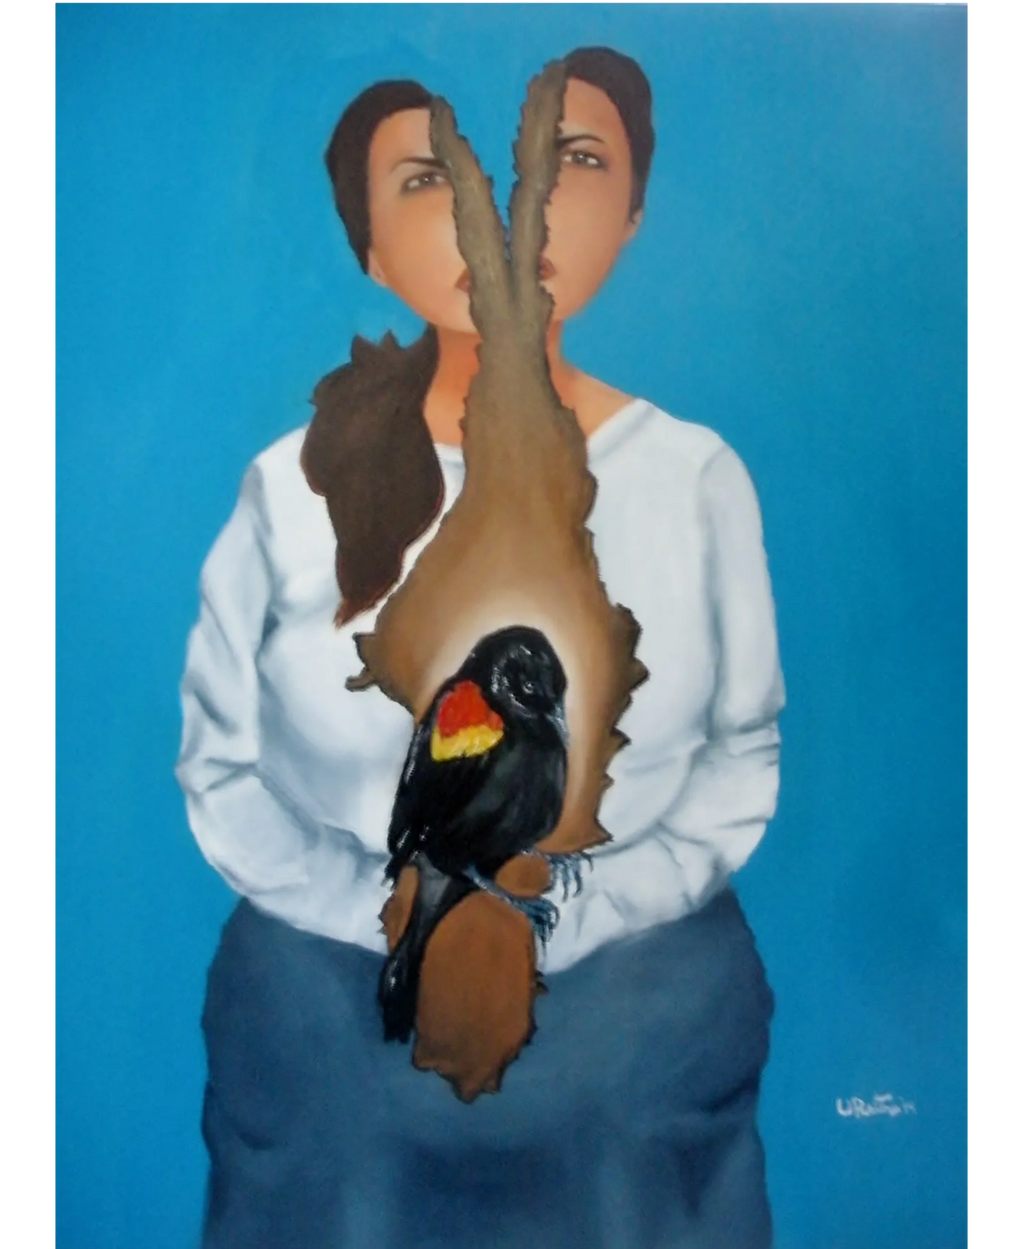 Latina woman seated ripped down center red-winged black bird in center cerulean blue background 